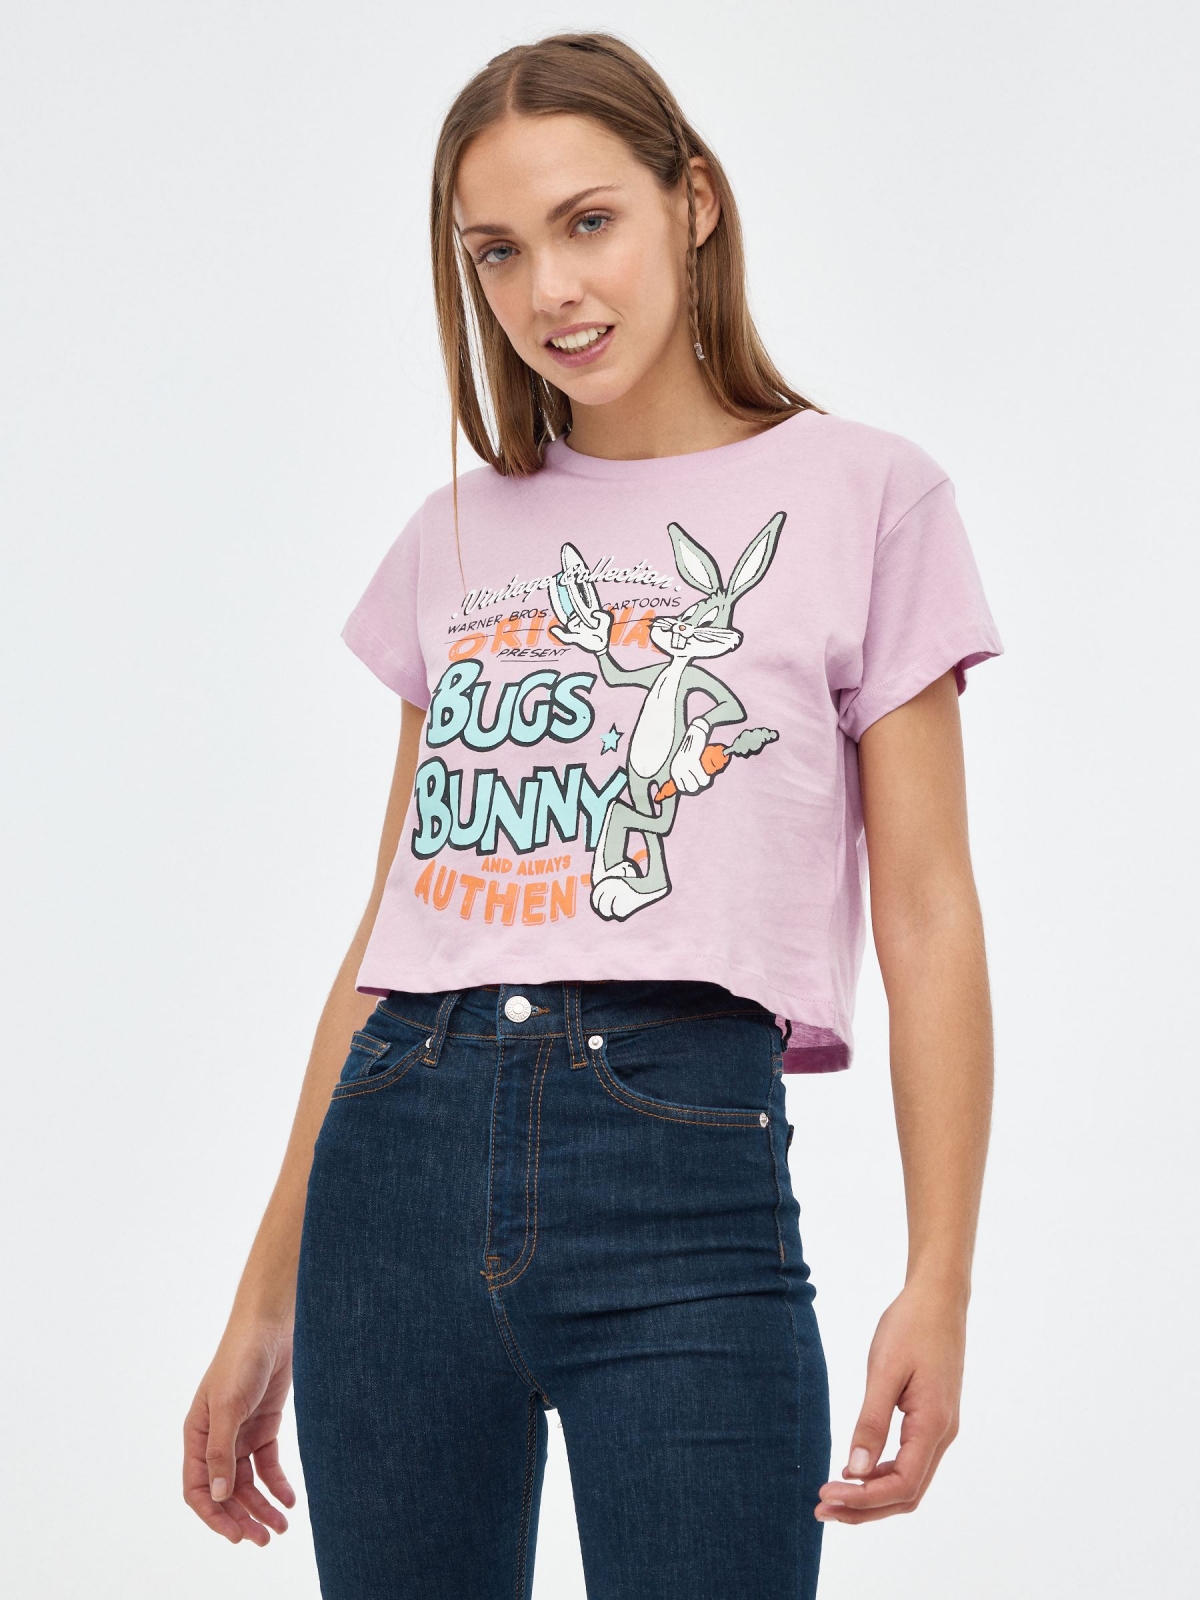 Bugs bunny  t-shirt mauve middle front view